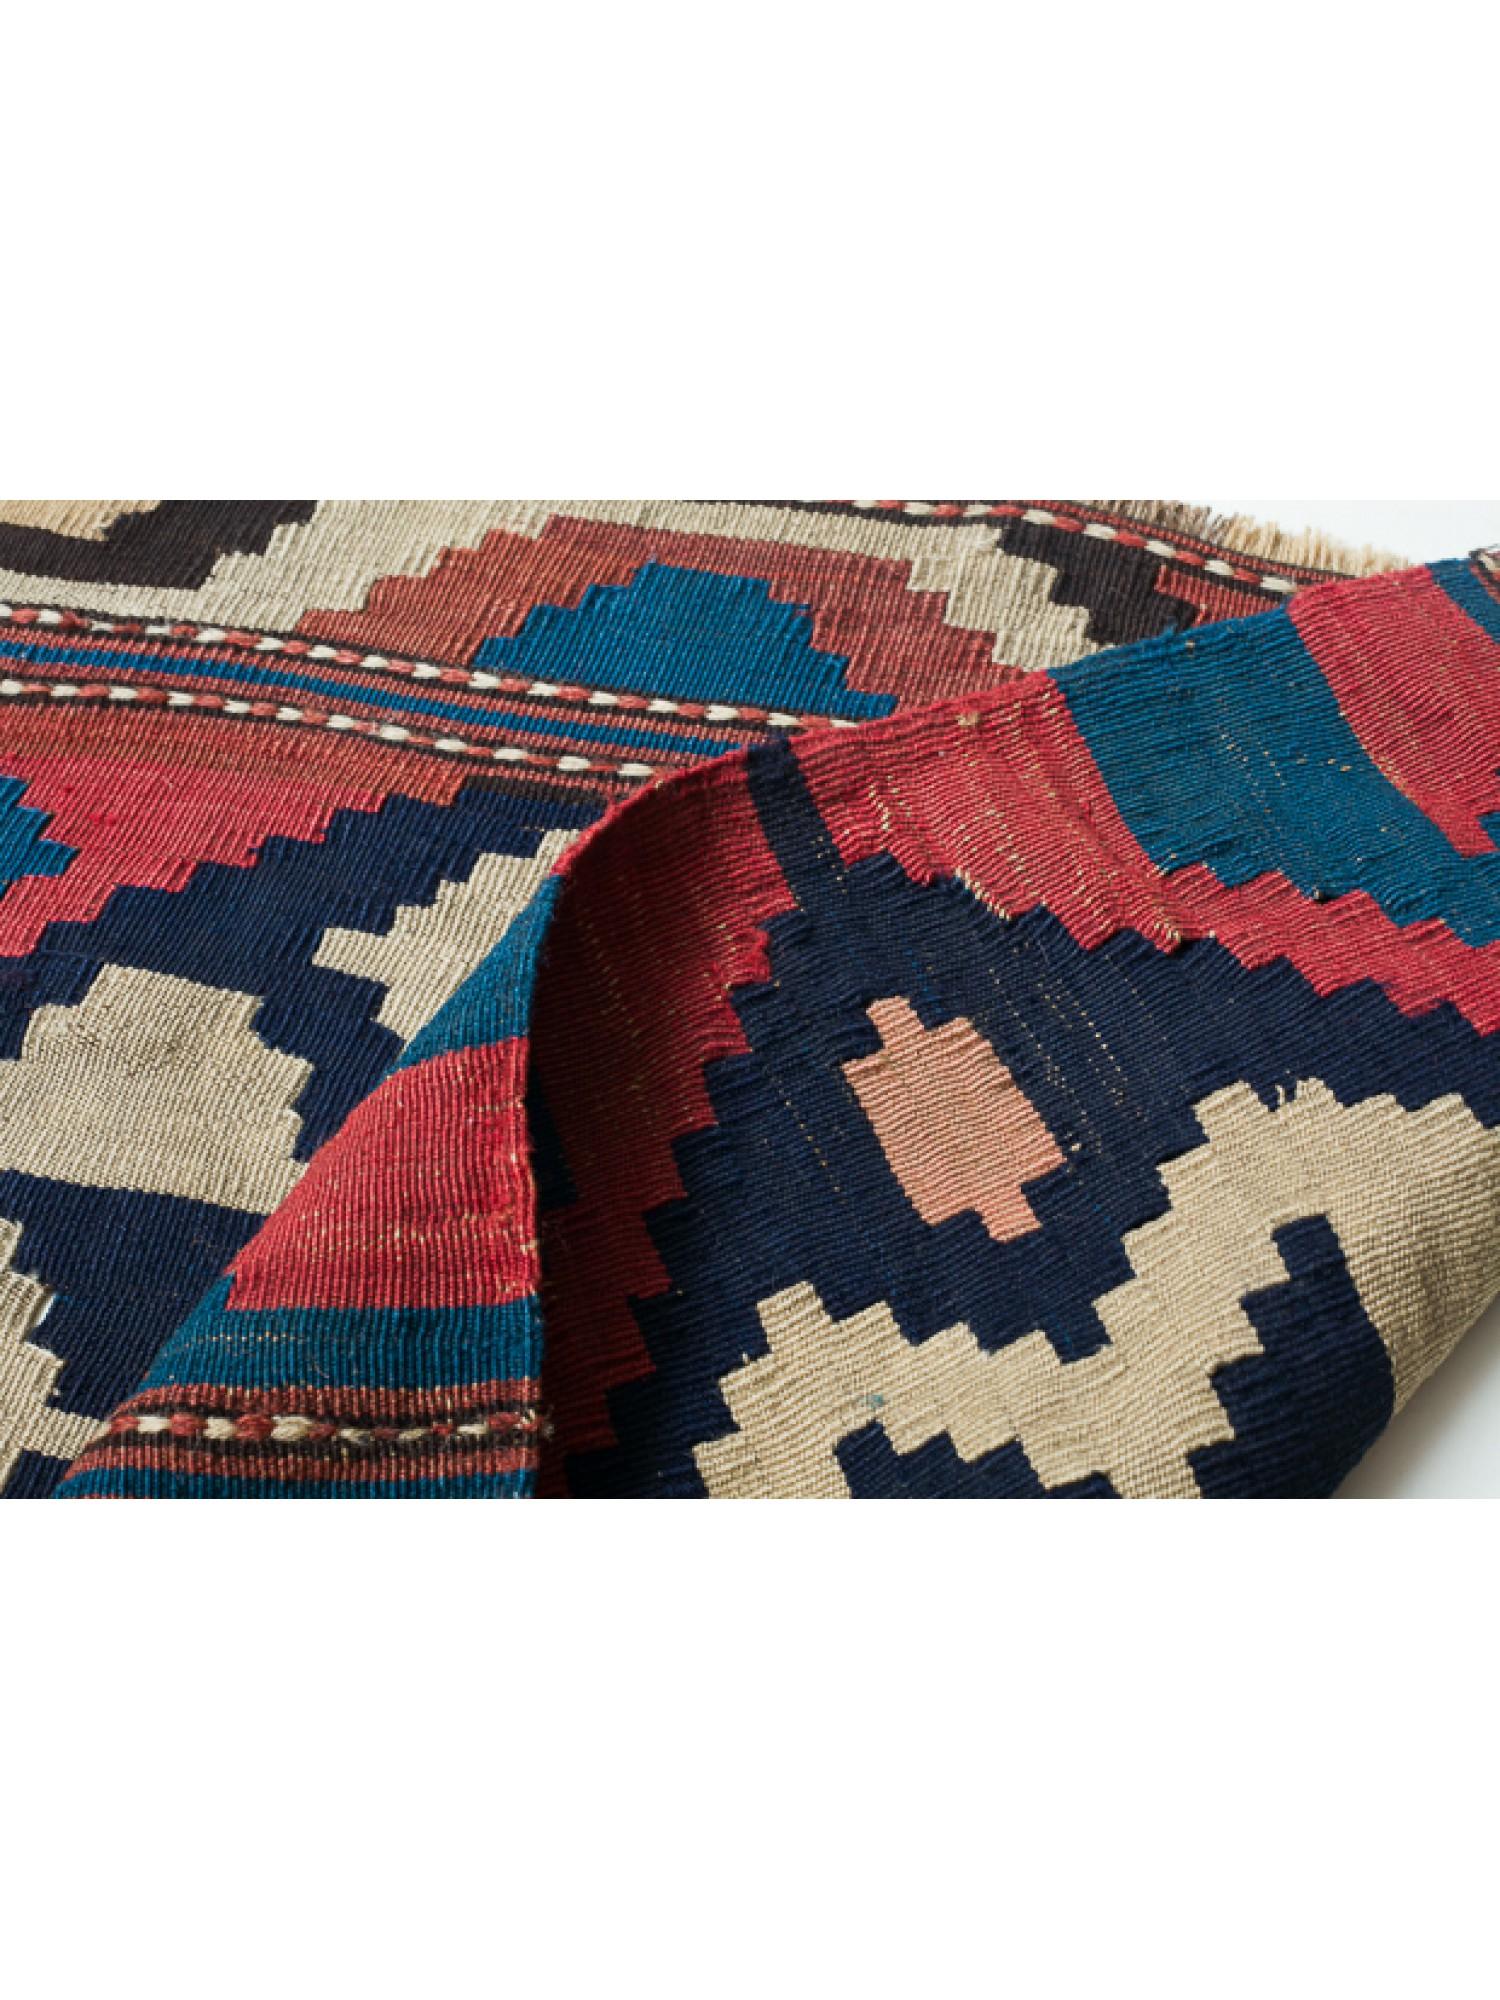 Antique Early 20th Century Caucasian Kilim Woven Cradle Part, Natural Dyed For Sale 1